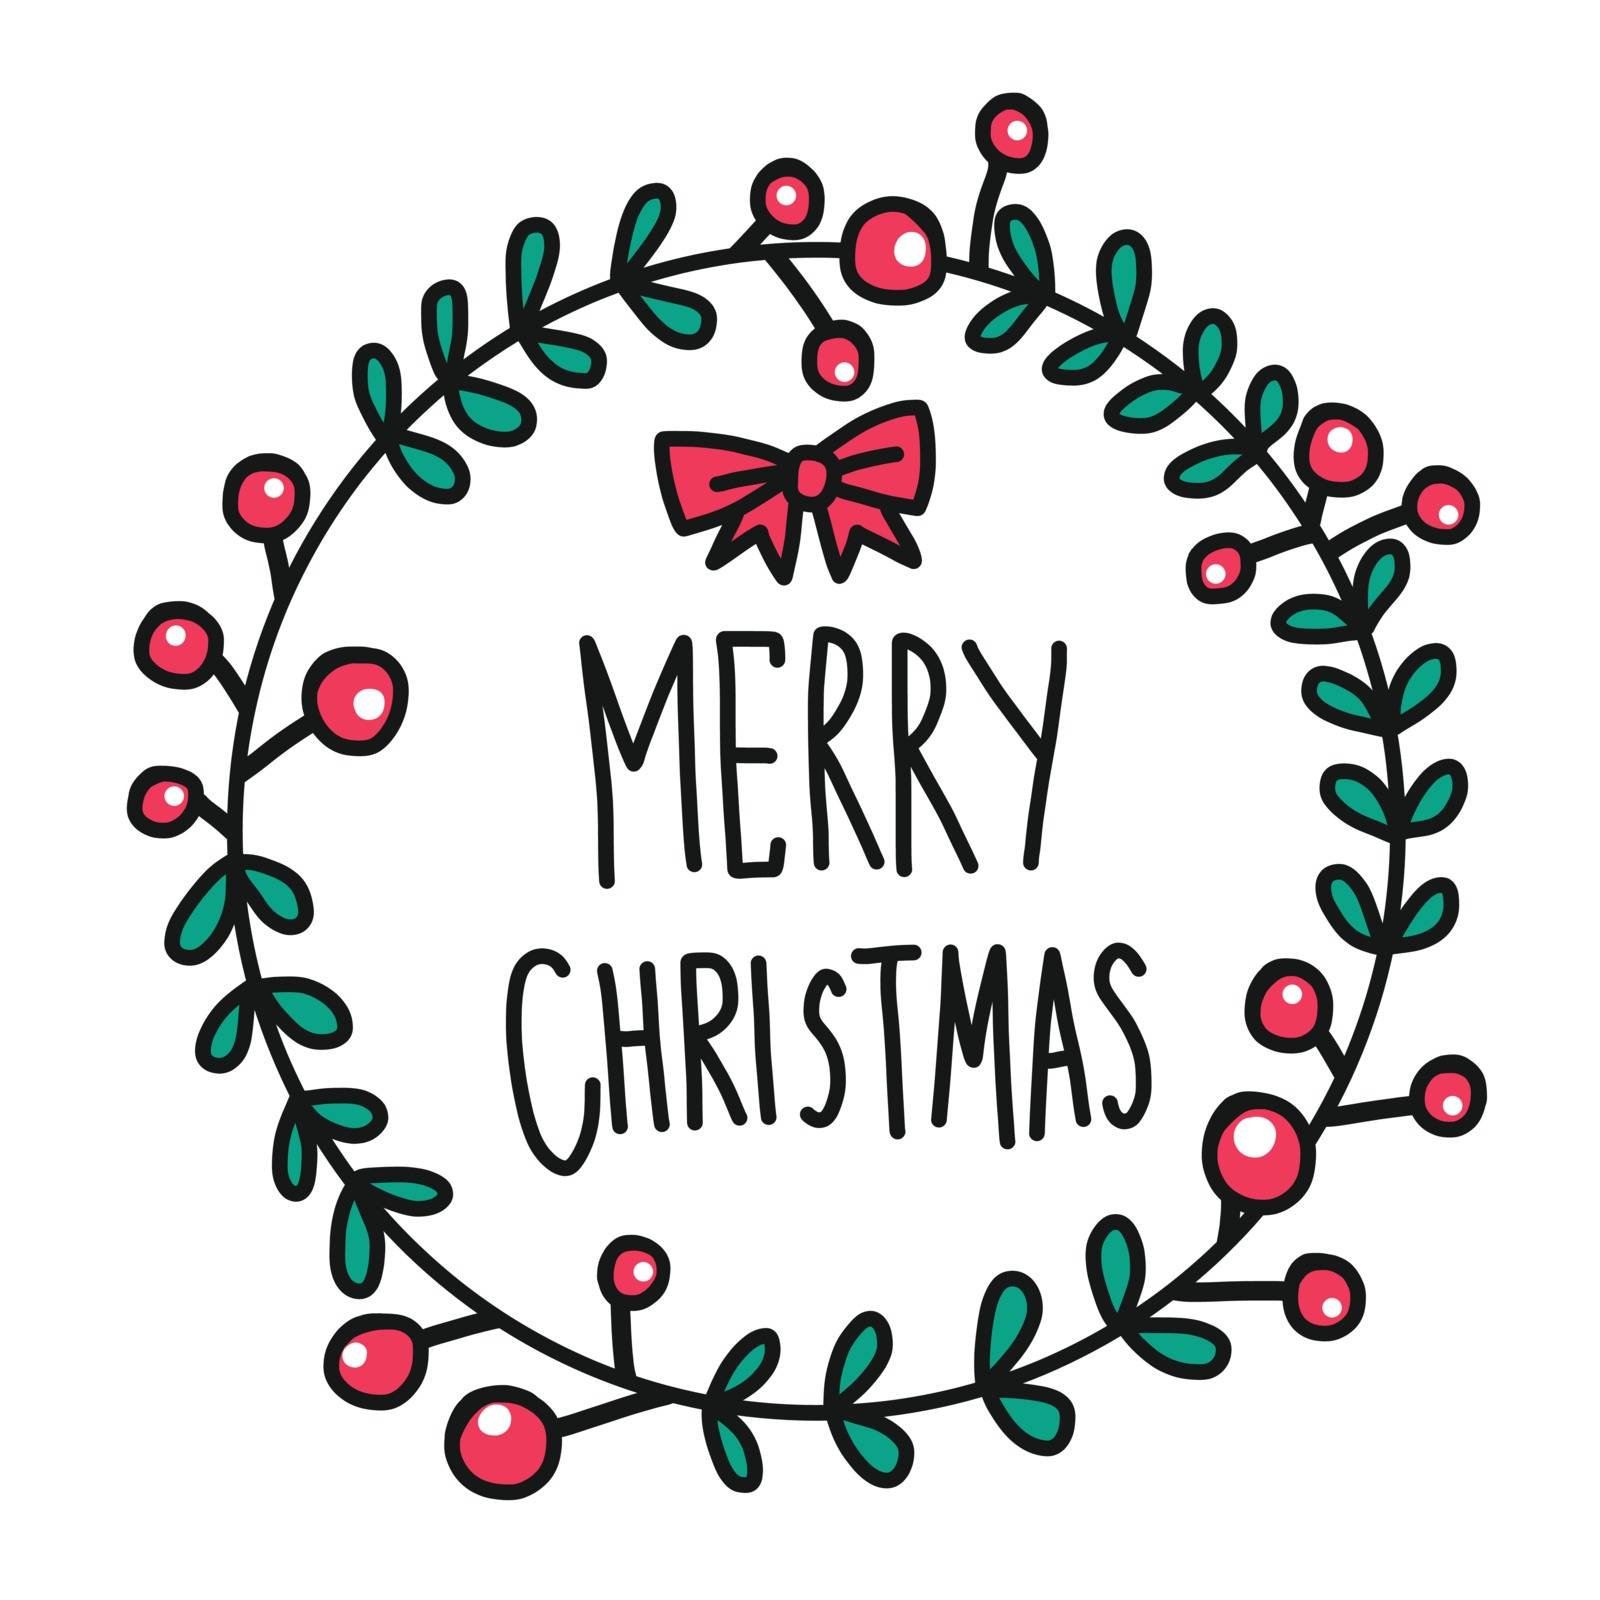 Merry Christmas word in cure flower wreath doodle style vector illustration by Yoopho